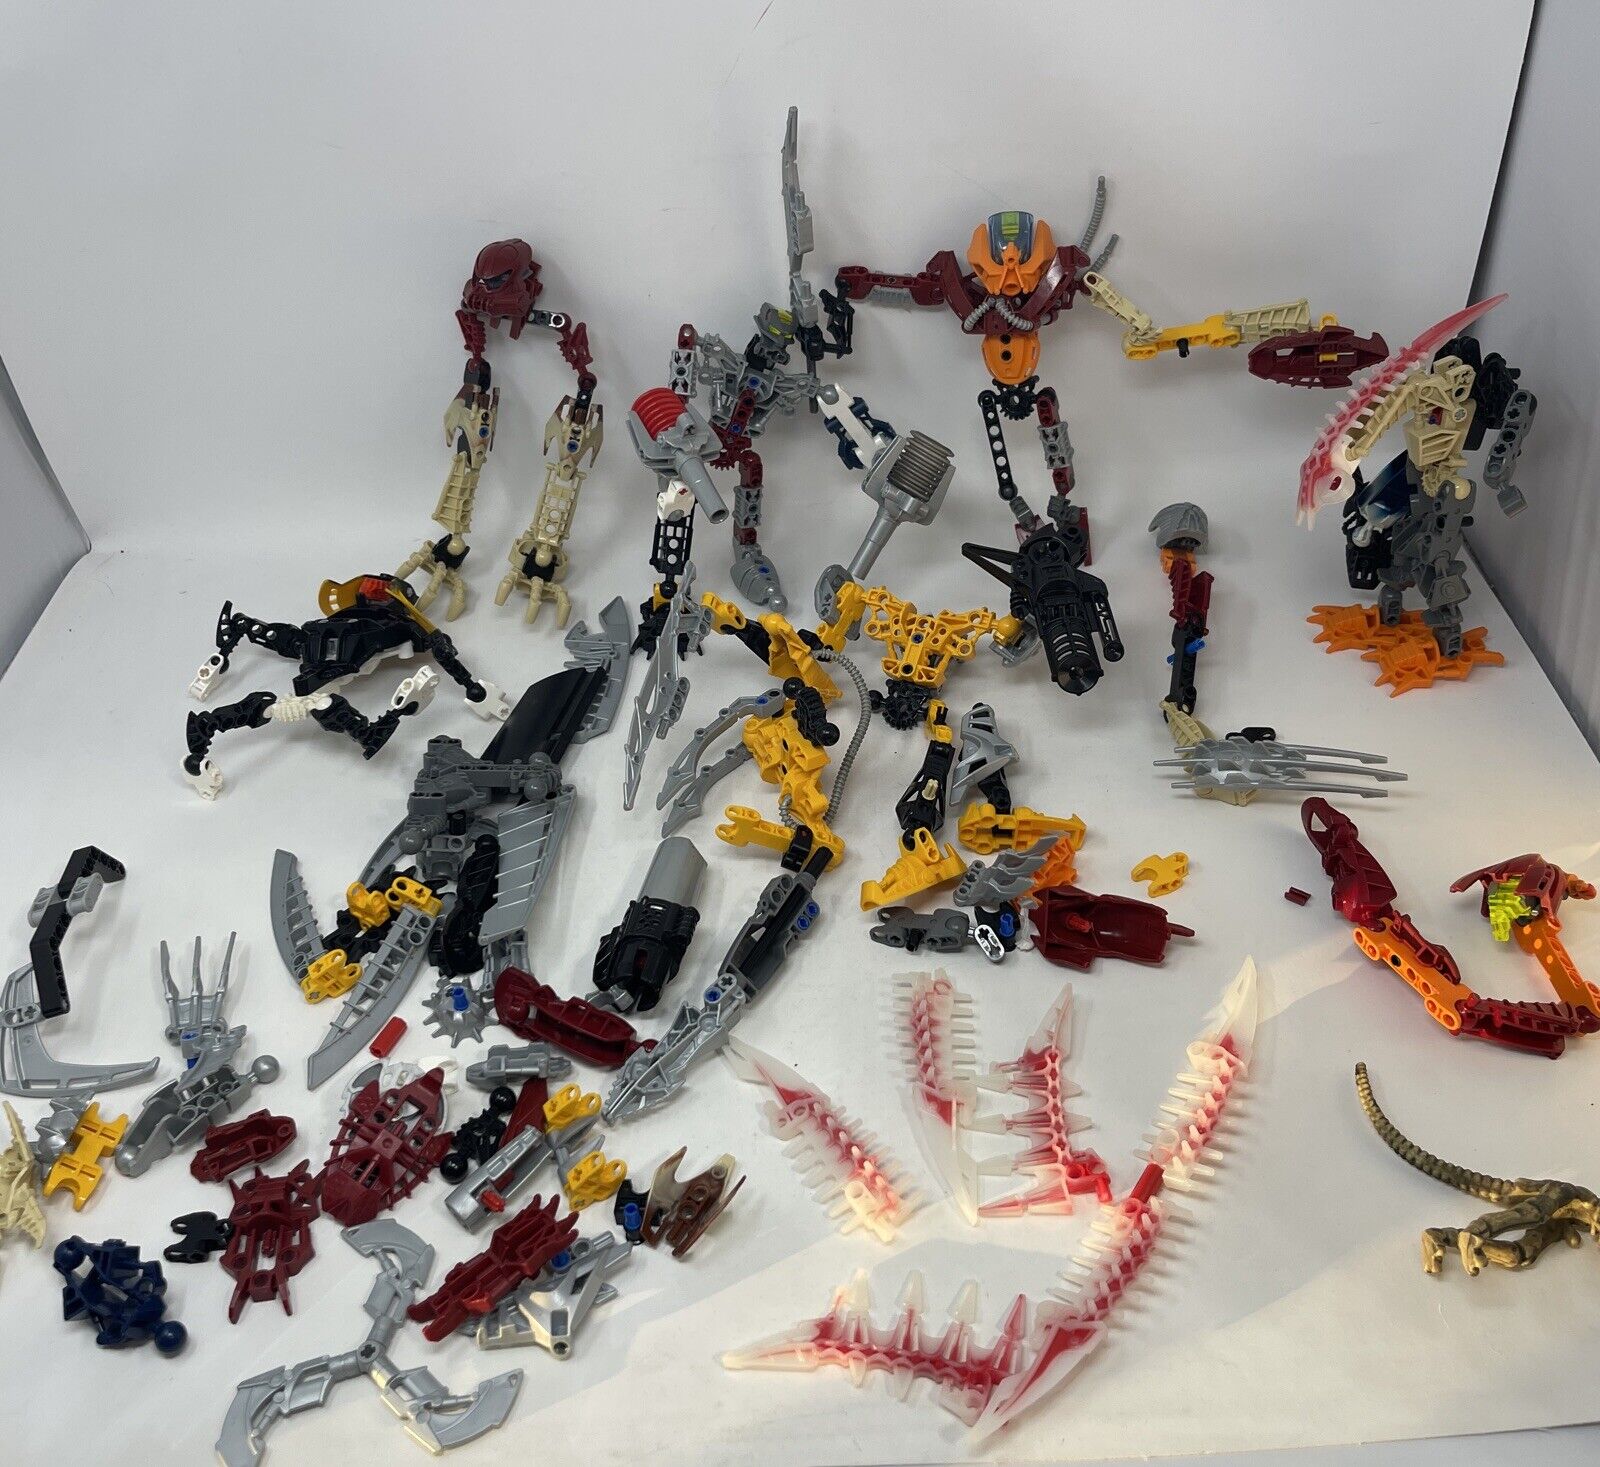 HUGE LEGO BIONICLES LOT - Figures Parts Pieces and Accessories - KRIKA